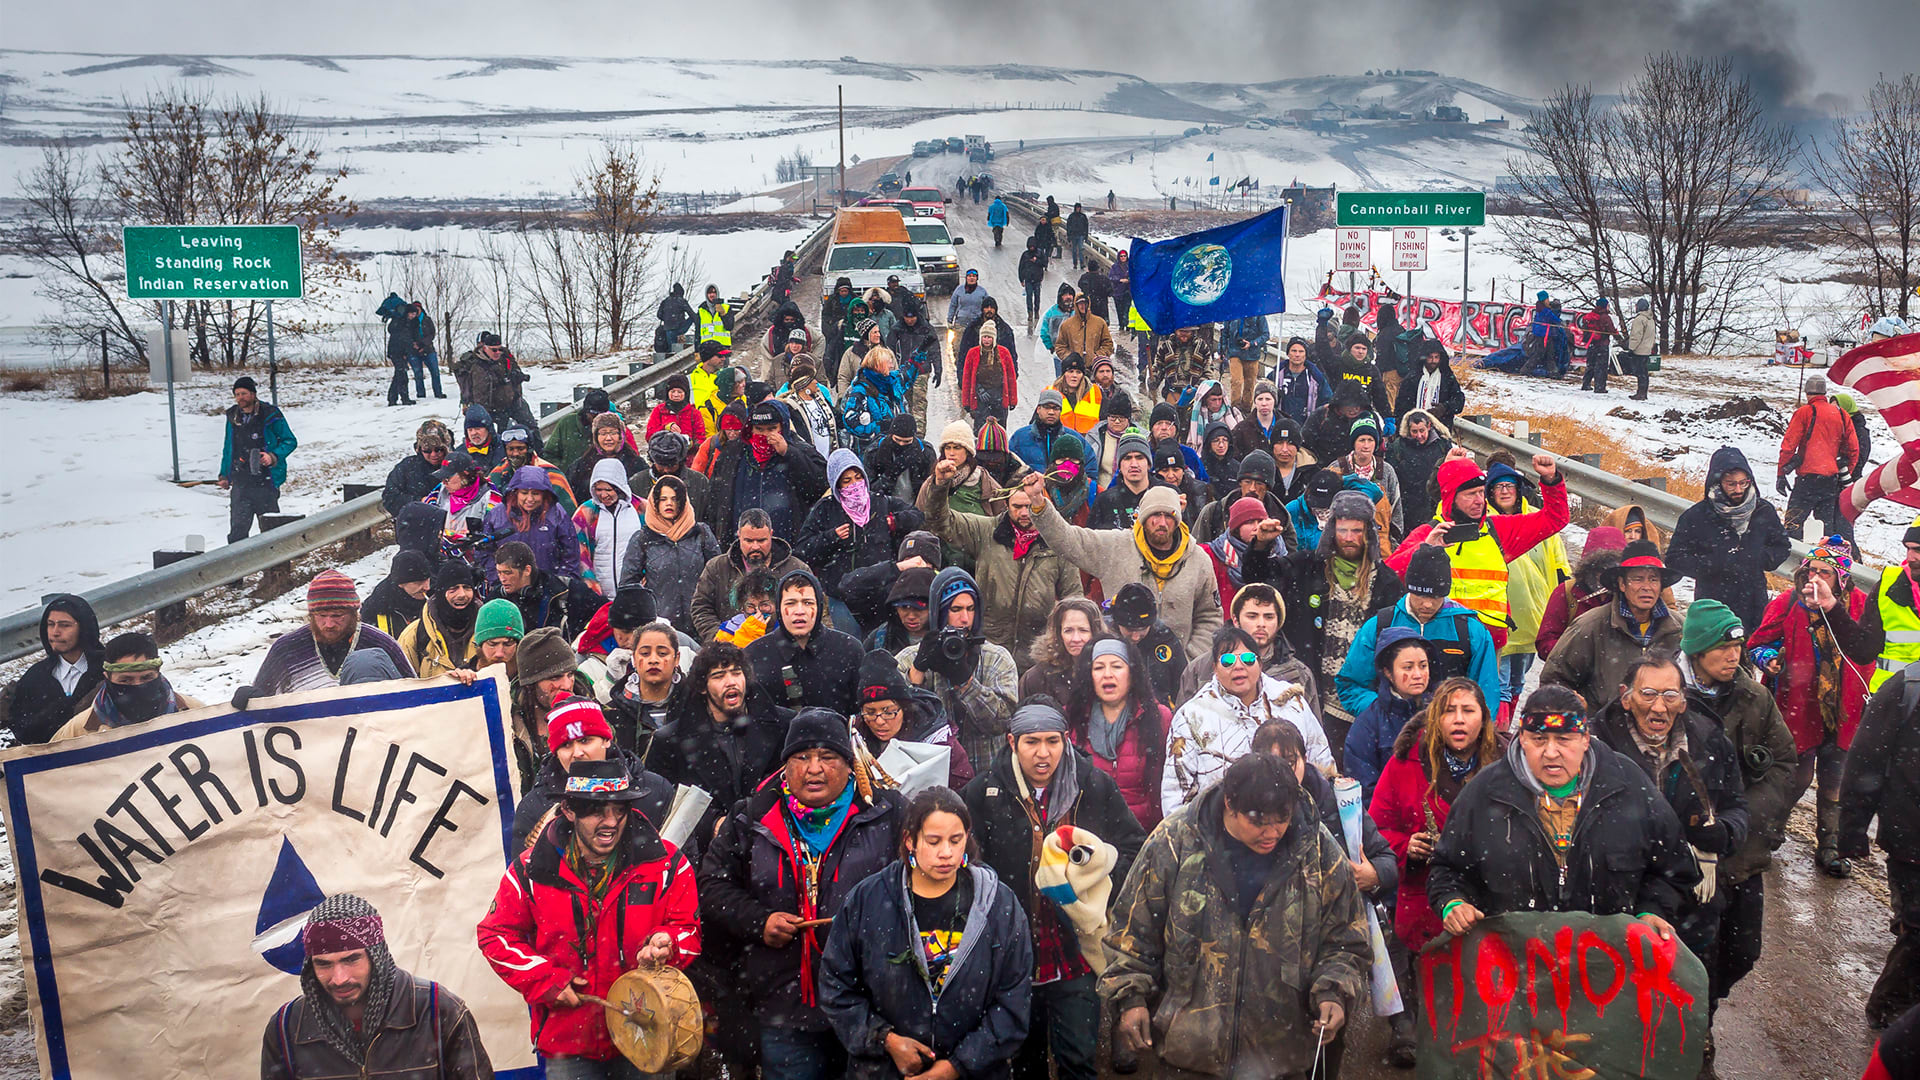 The Keystone Pipeline Is Approved, But There May Not Be Enough Demand To Build It